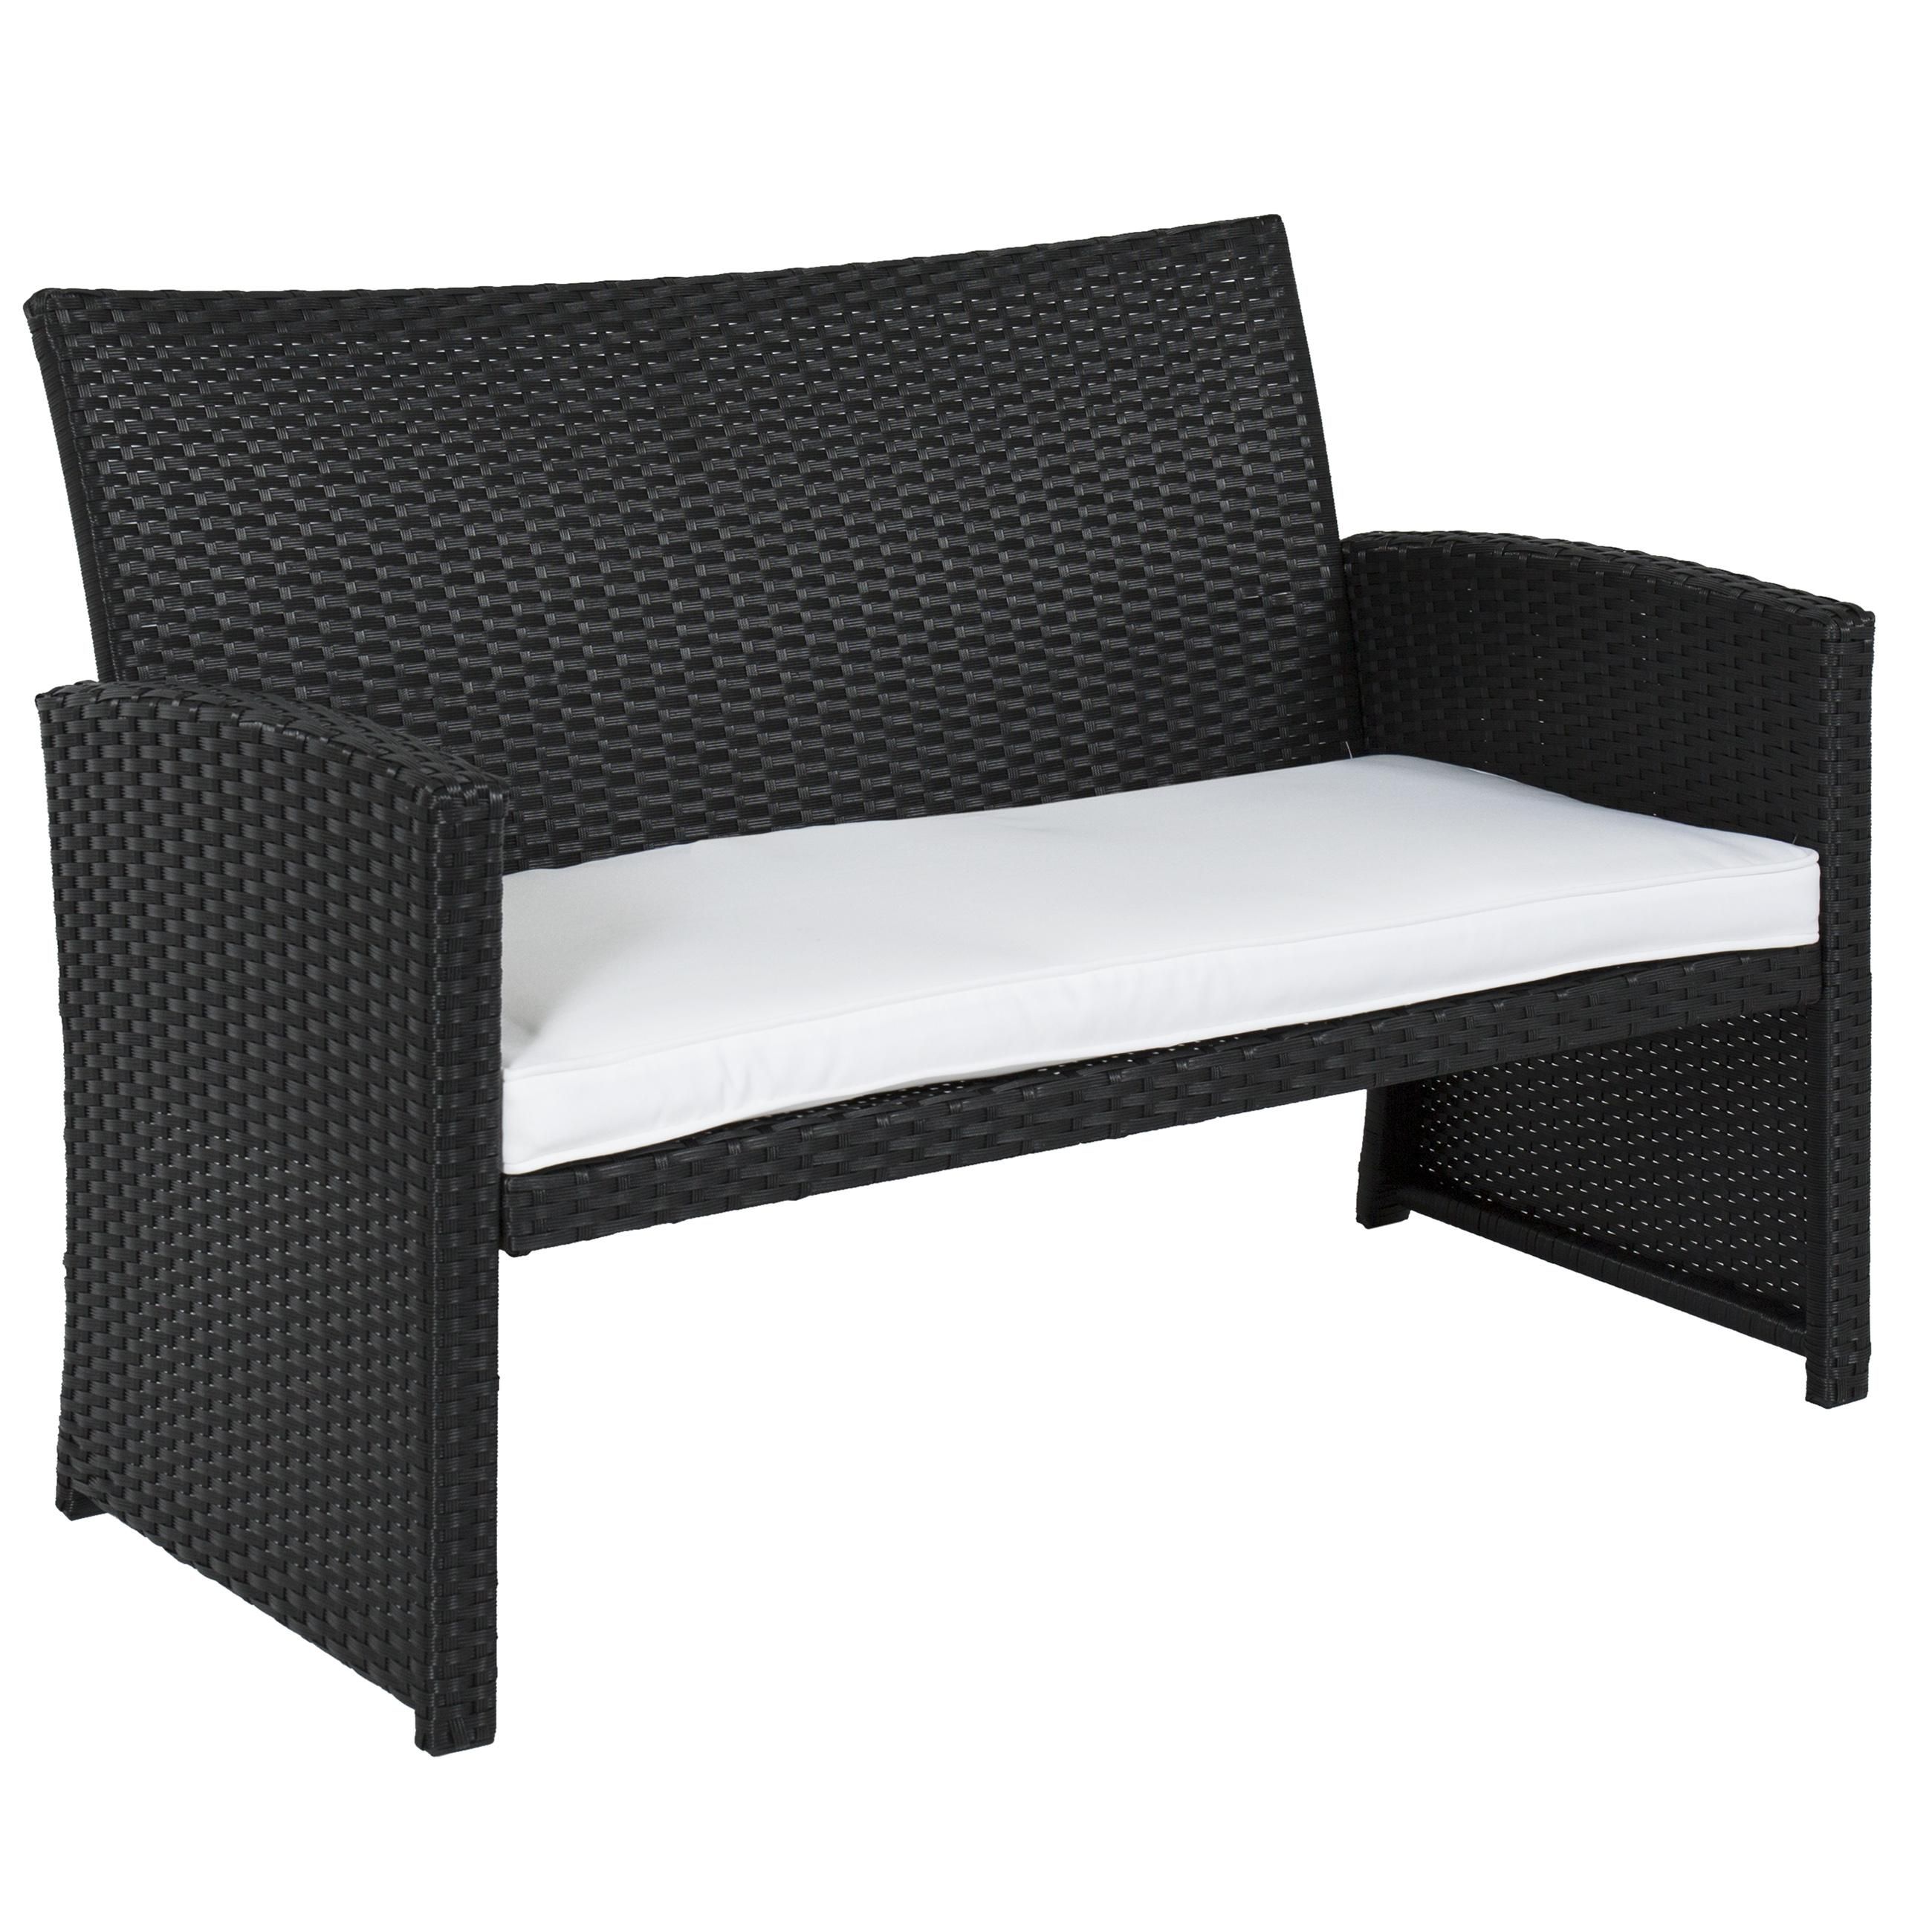 Best Choice Products Outdoor Garden Patio 4pc Cushioned Seat Black Pertaining To Black Wicker Sofas (View 15 of 20)